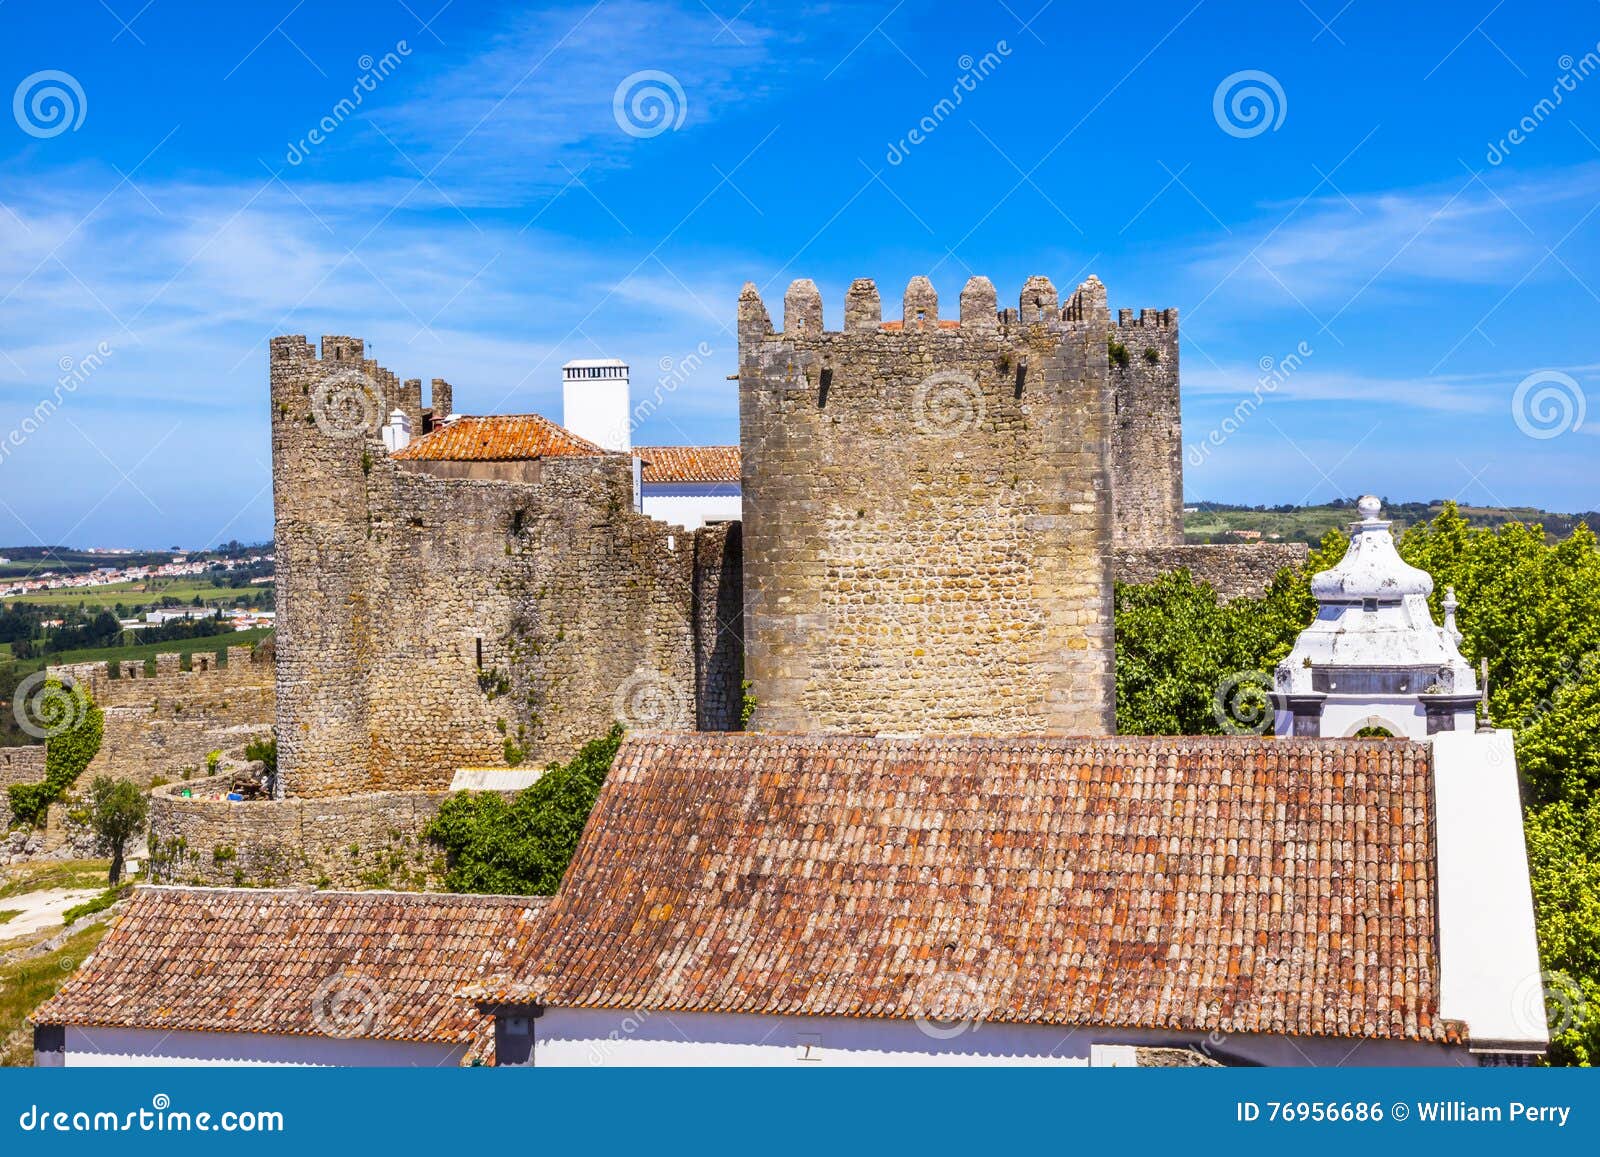 castle turrets towers walls roofs obidos portugal